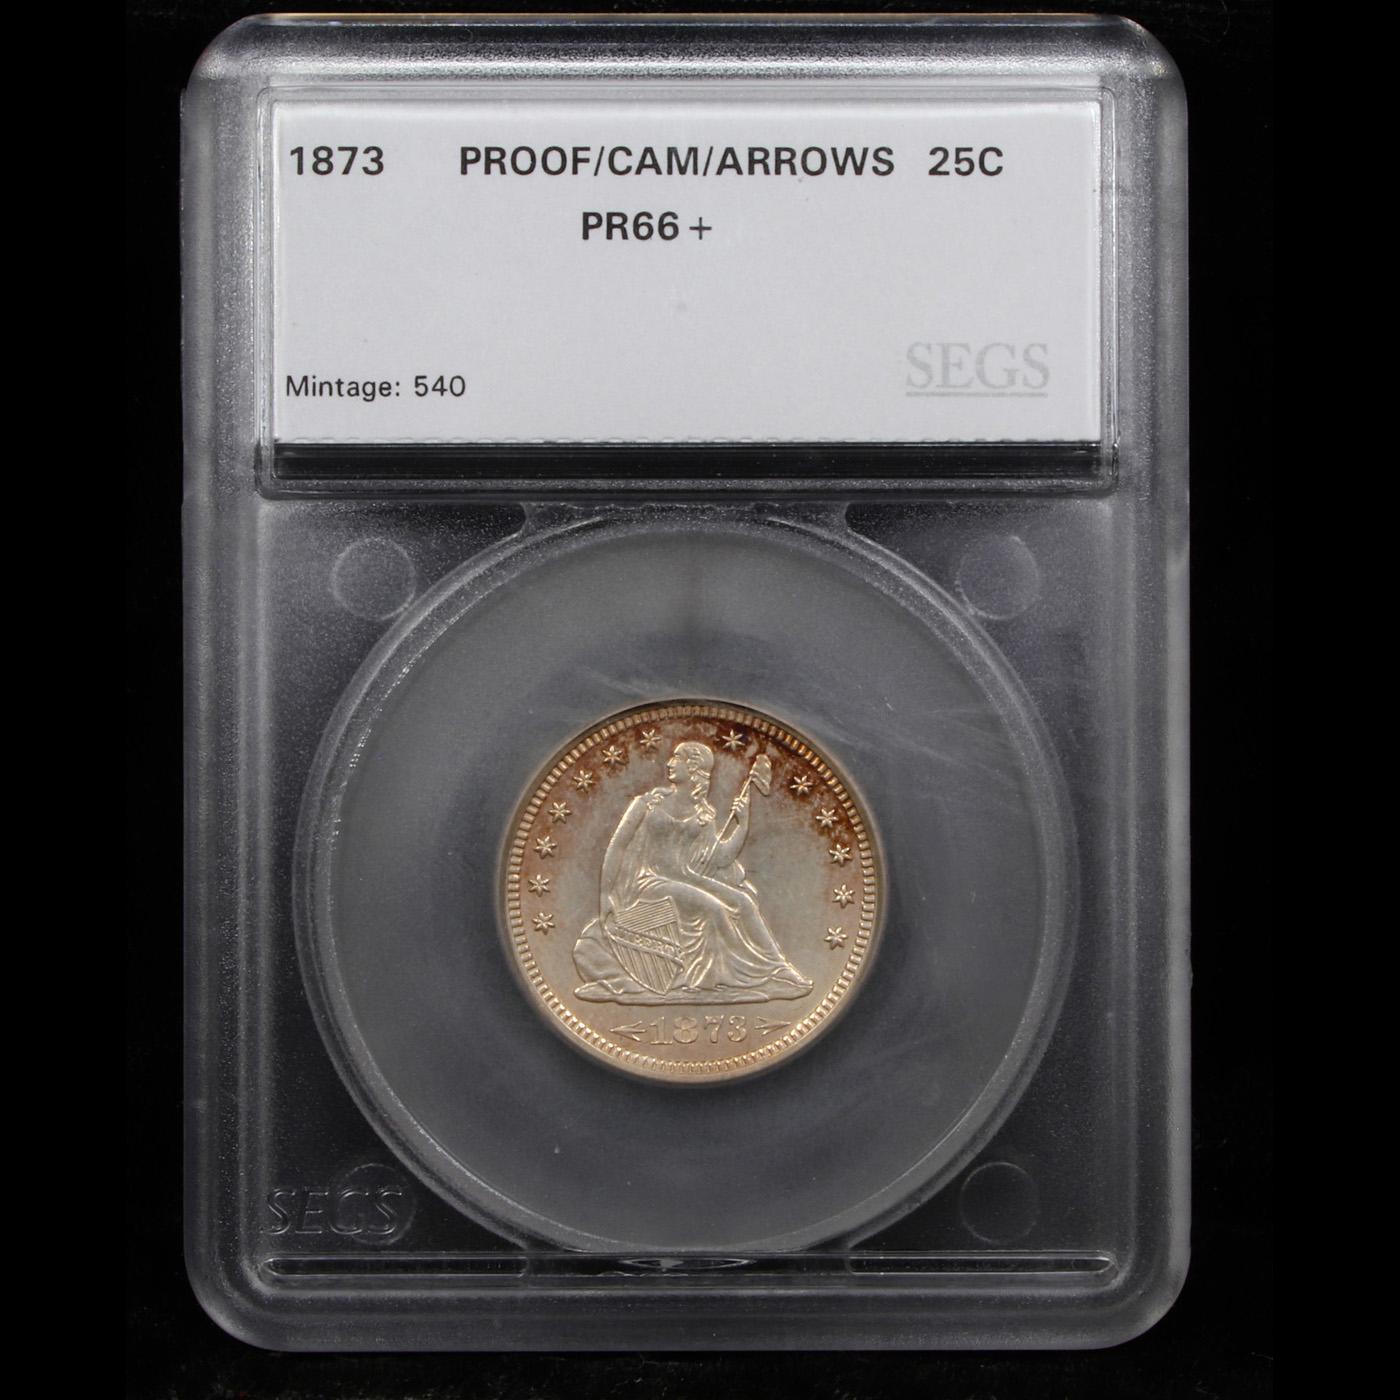 Proof ***Auction Highlight*** 1873 Arrows @ date Seated Liberty Quarter 25c Graded pr66+ cam By SEGS